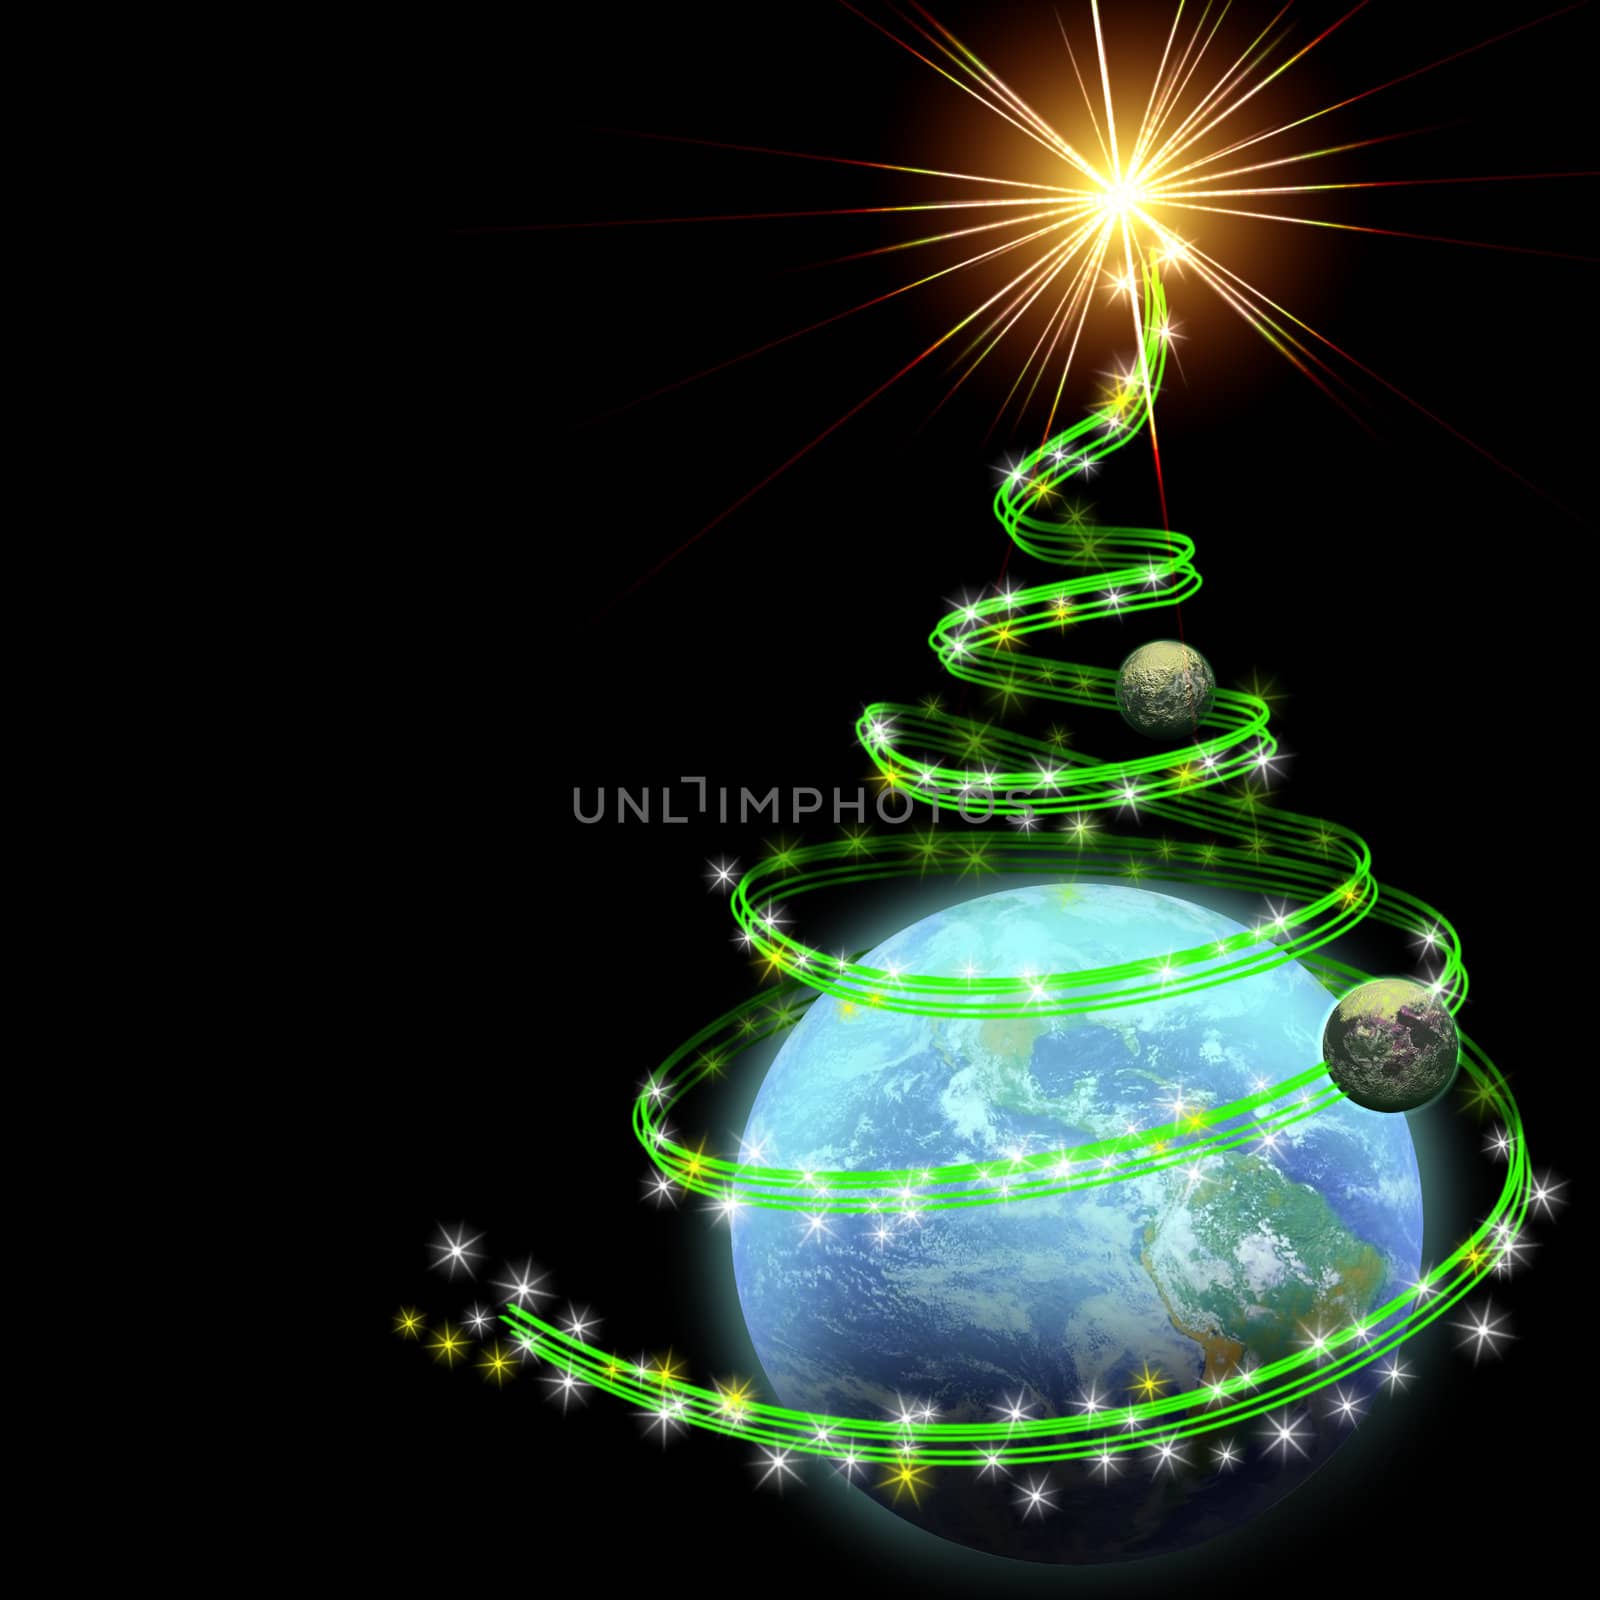 earth with abstract christmas tree spiral by akuli